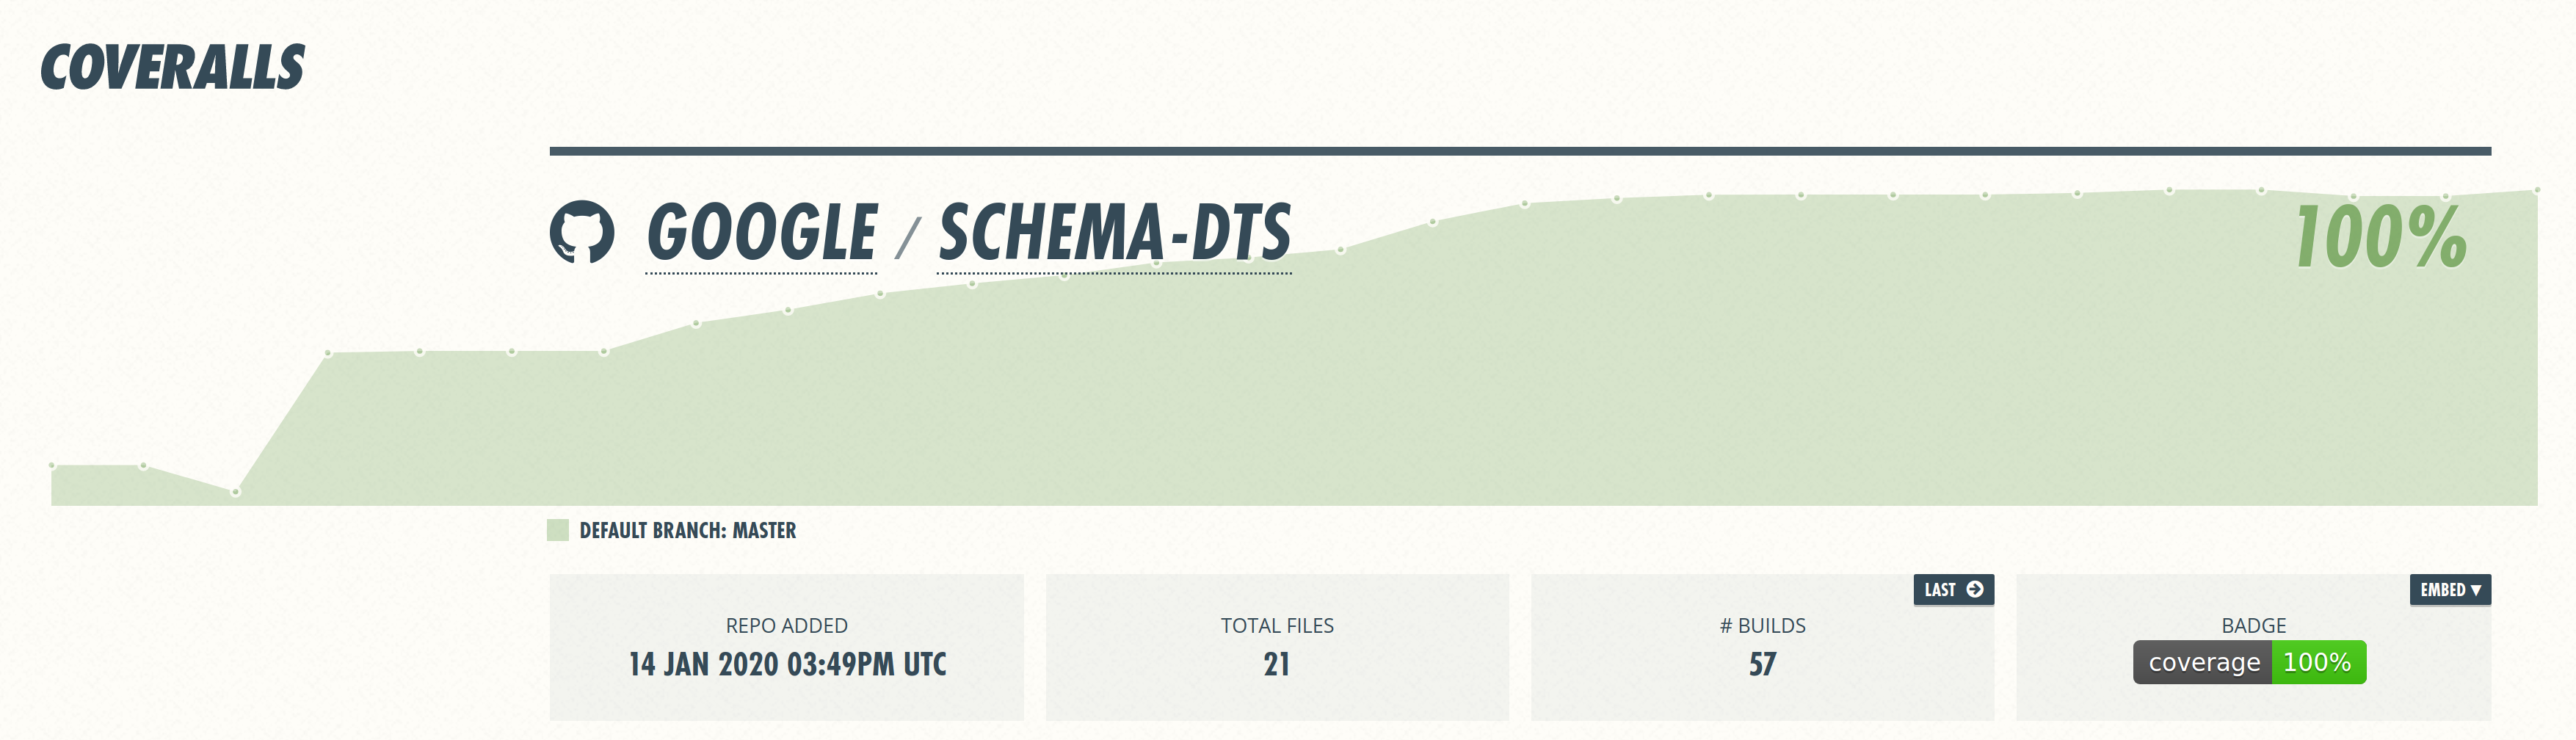 Coveralls.io screen grab for schema-dts showing how it got to 100% Test Coverage